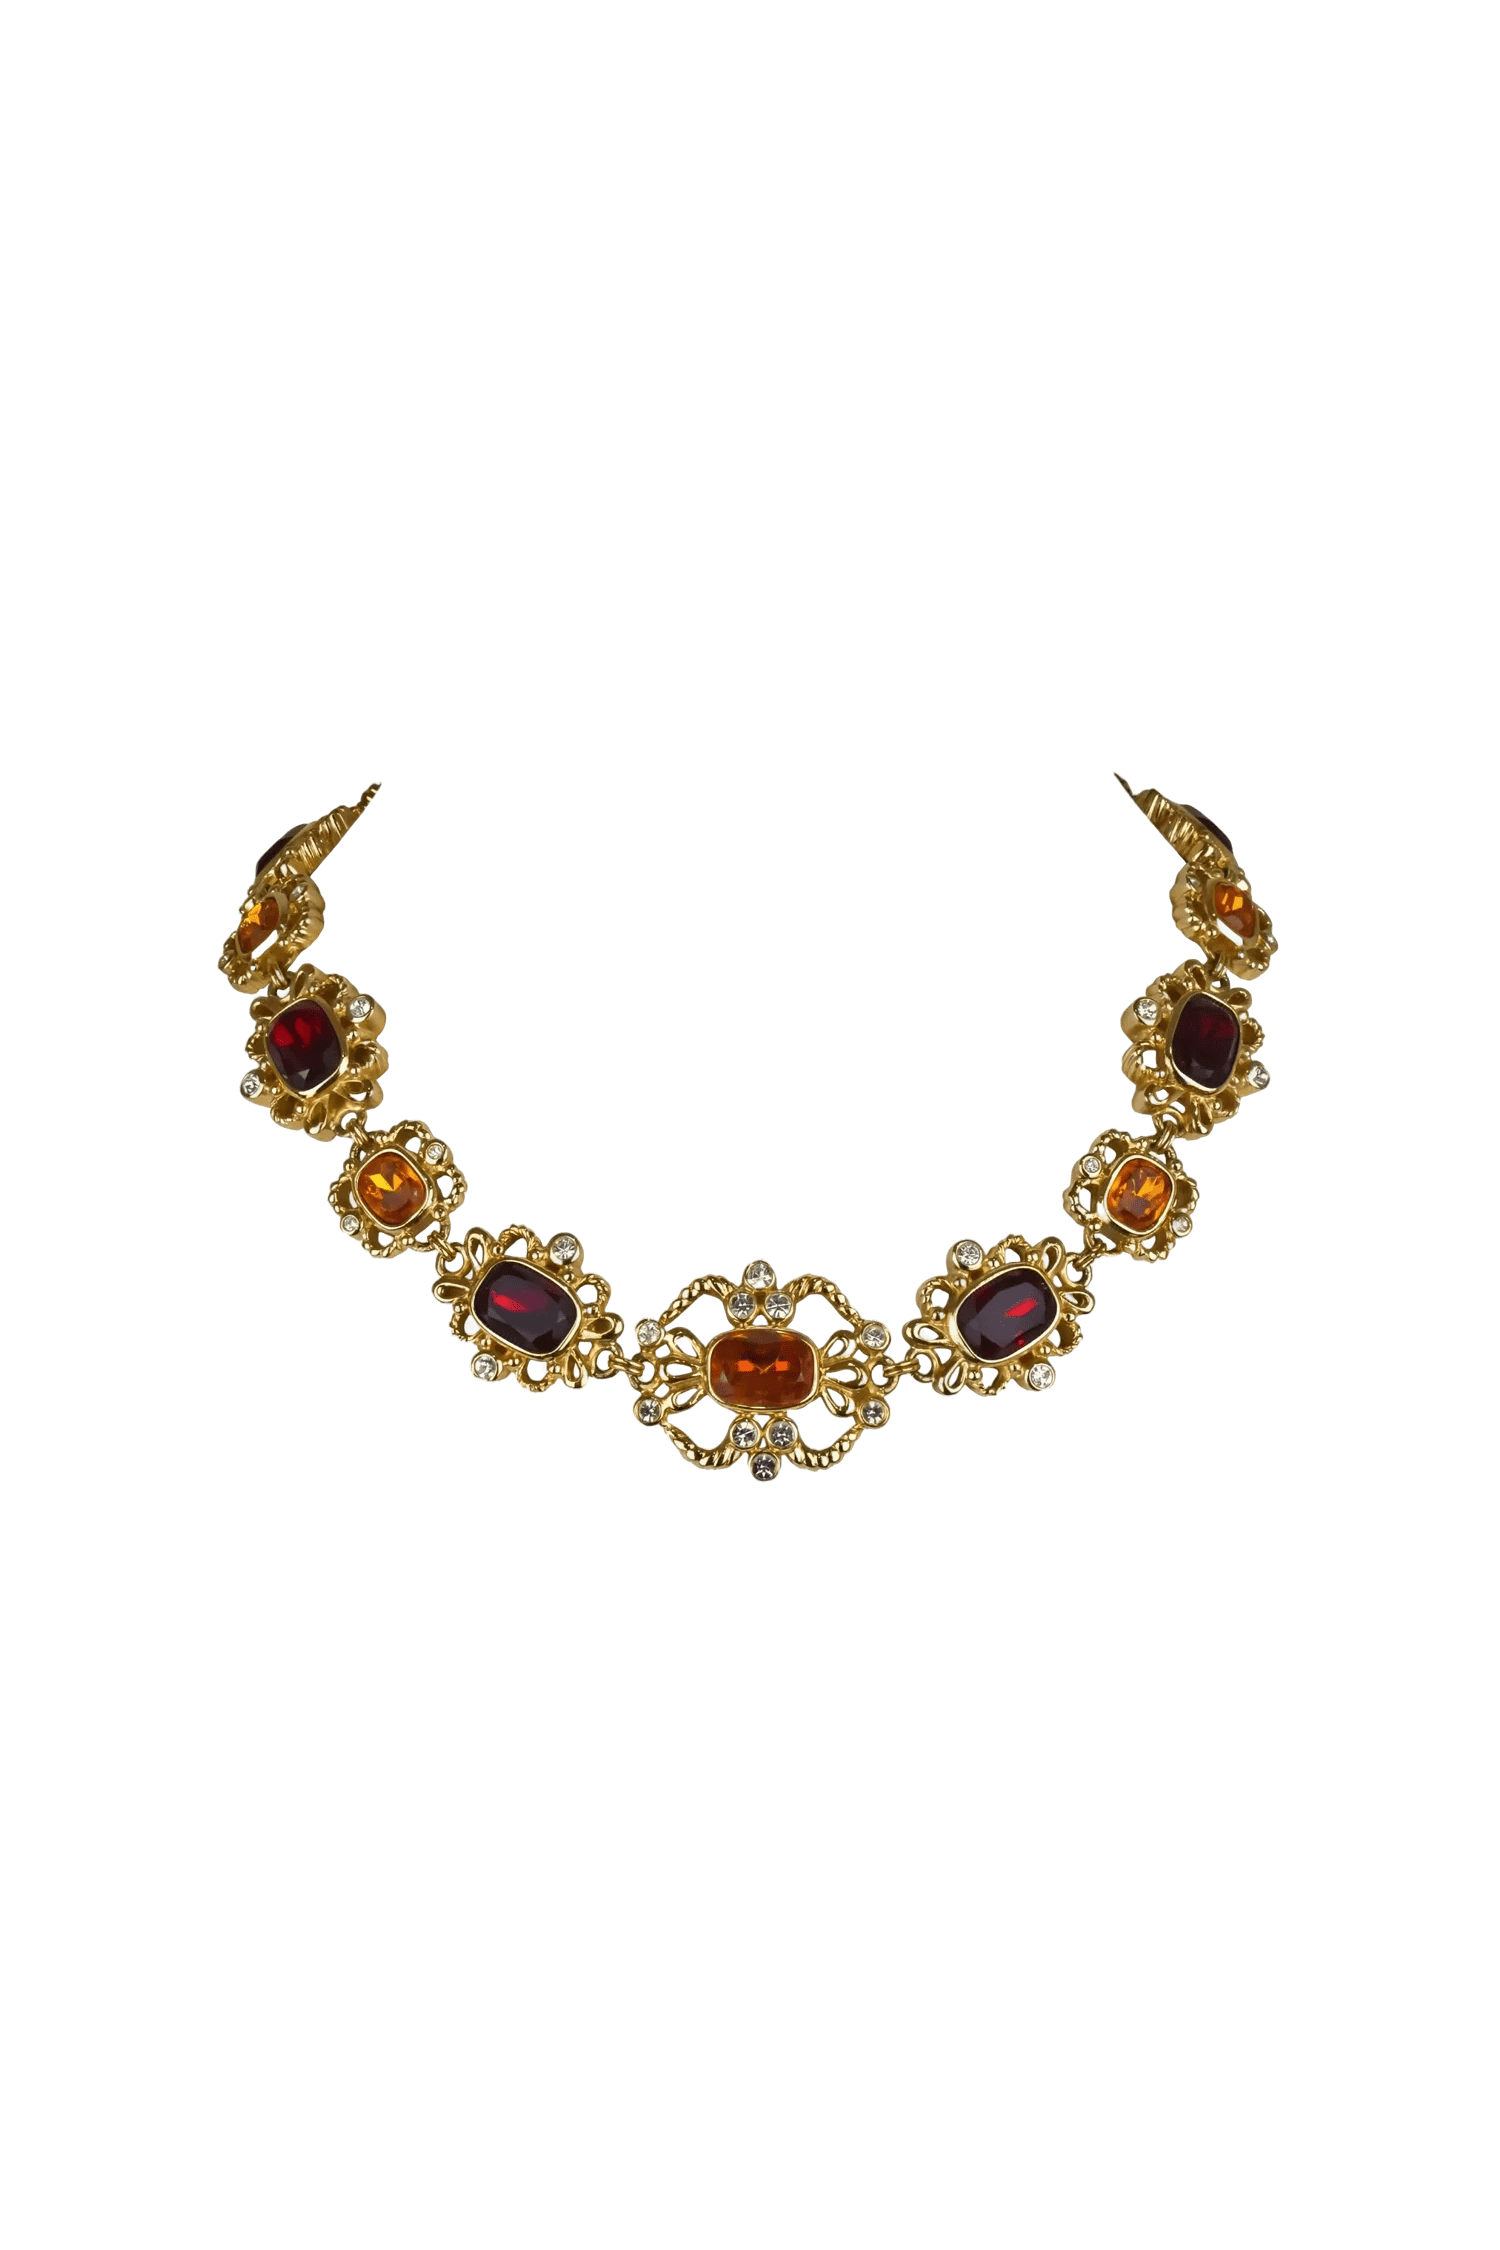 Christian Dior Rare Vintage Crystal Embellished Necklace 1960's-1970's - Foxy Couture Carmel